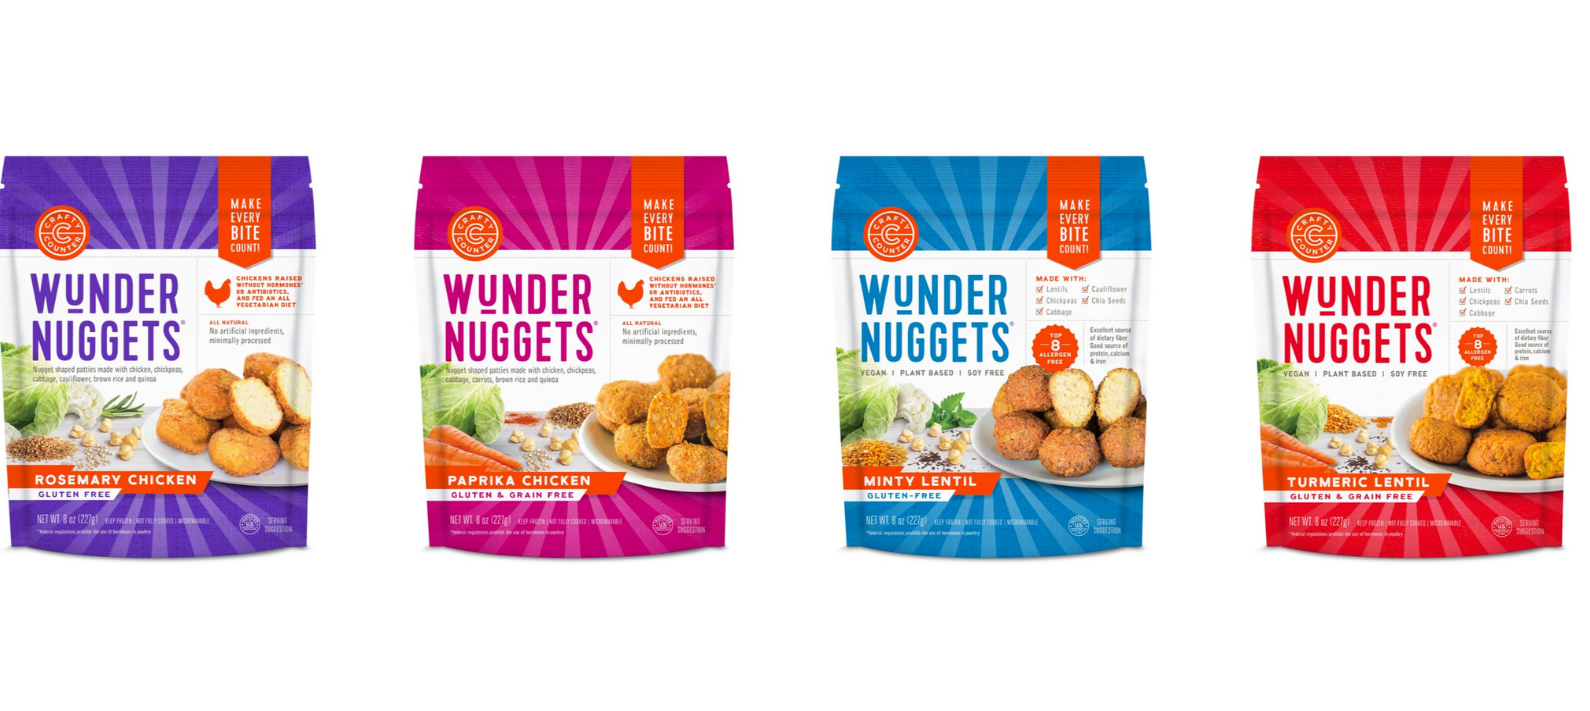 Design refresh! Plus the launch of new grain-free Wunder Nuggets